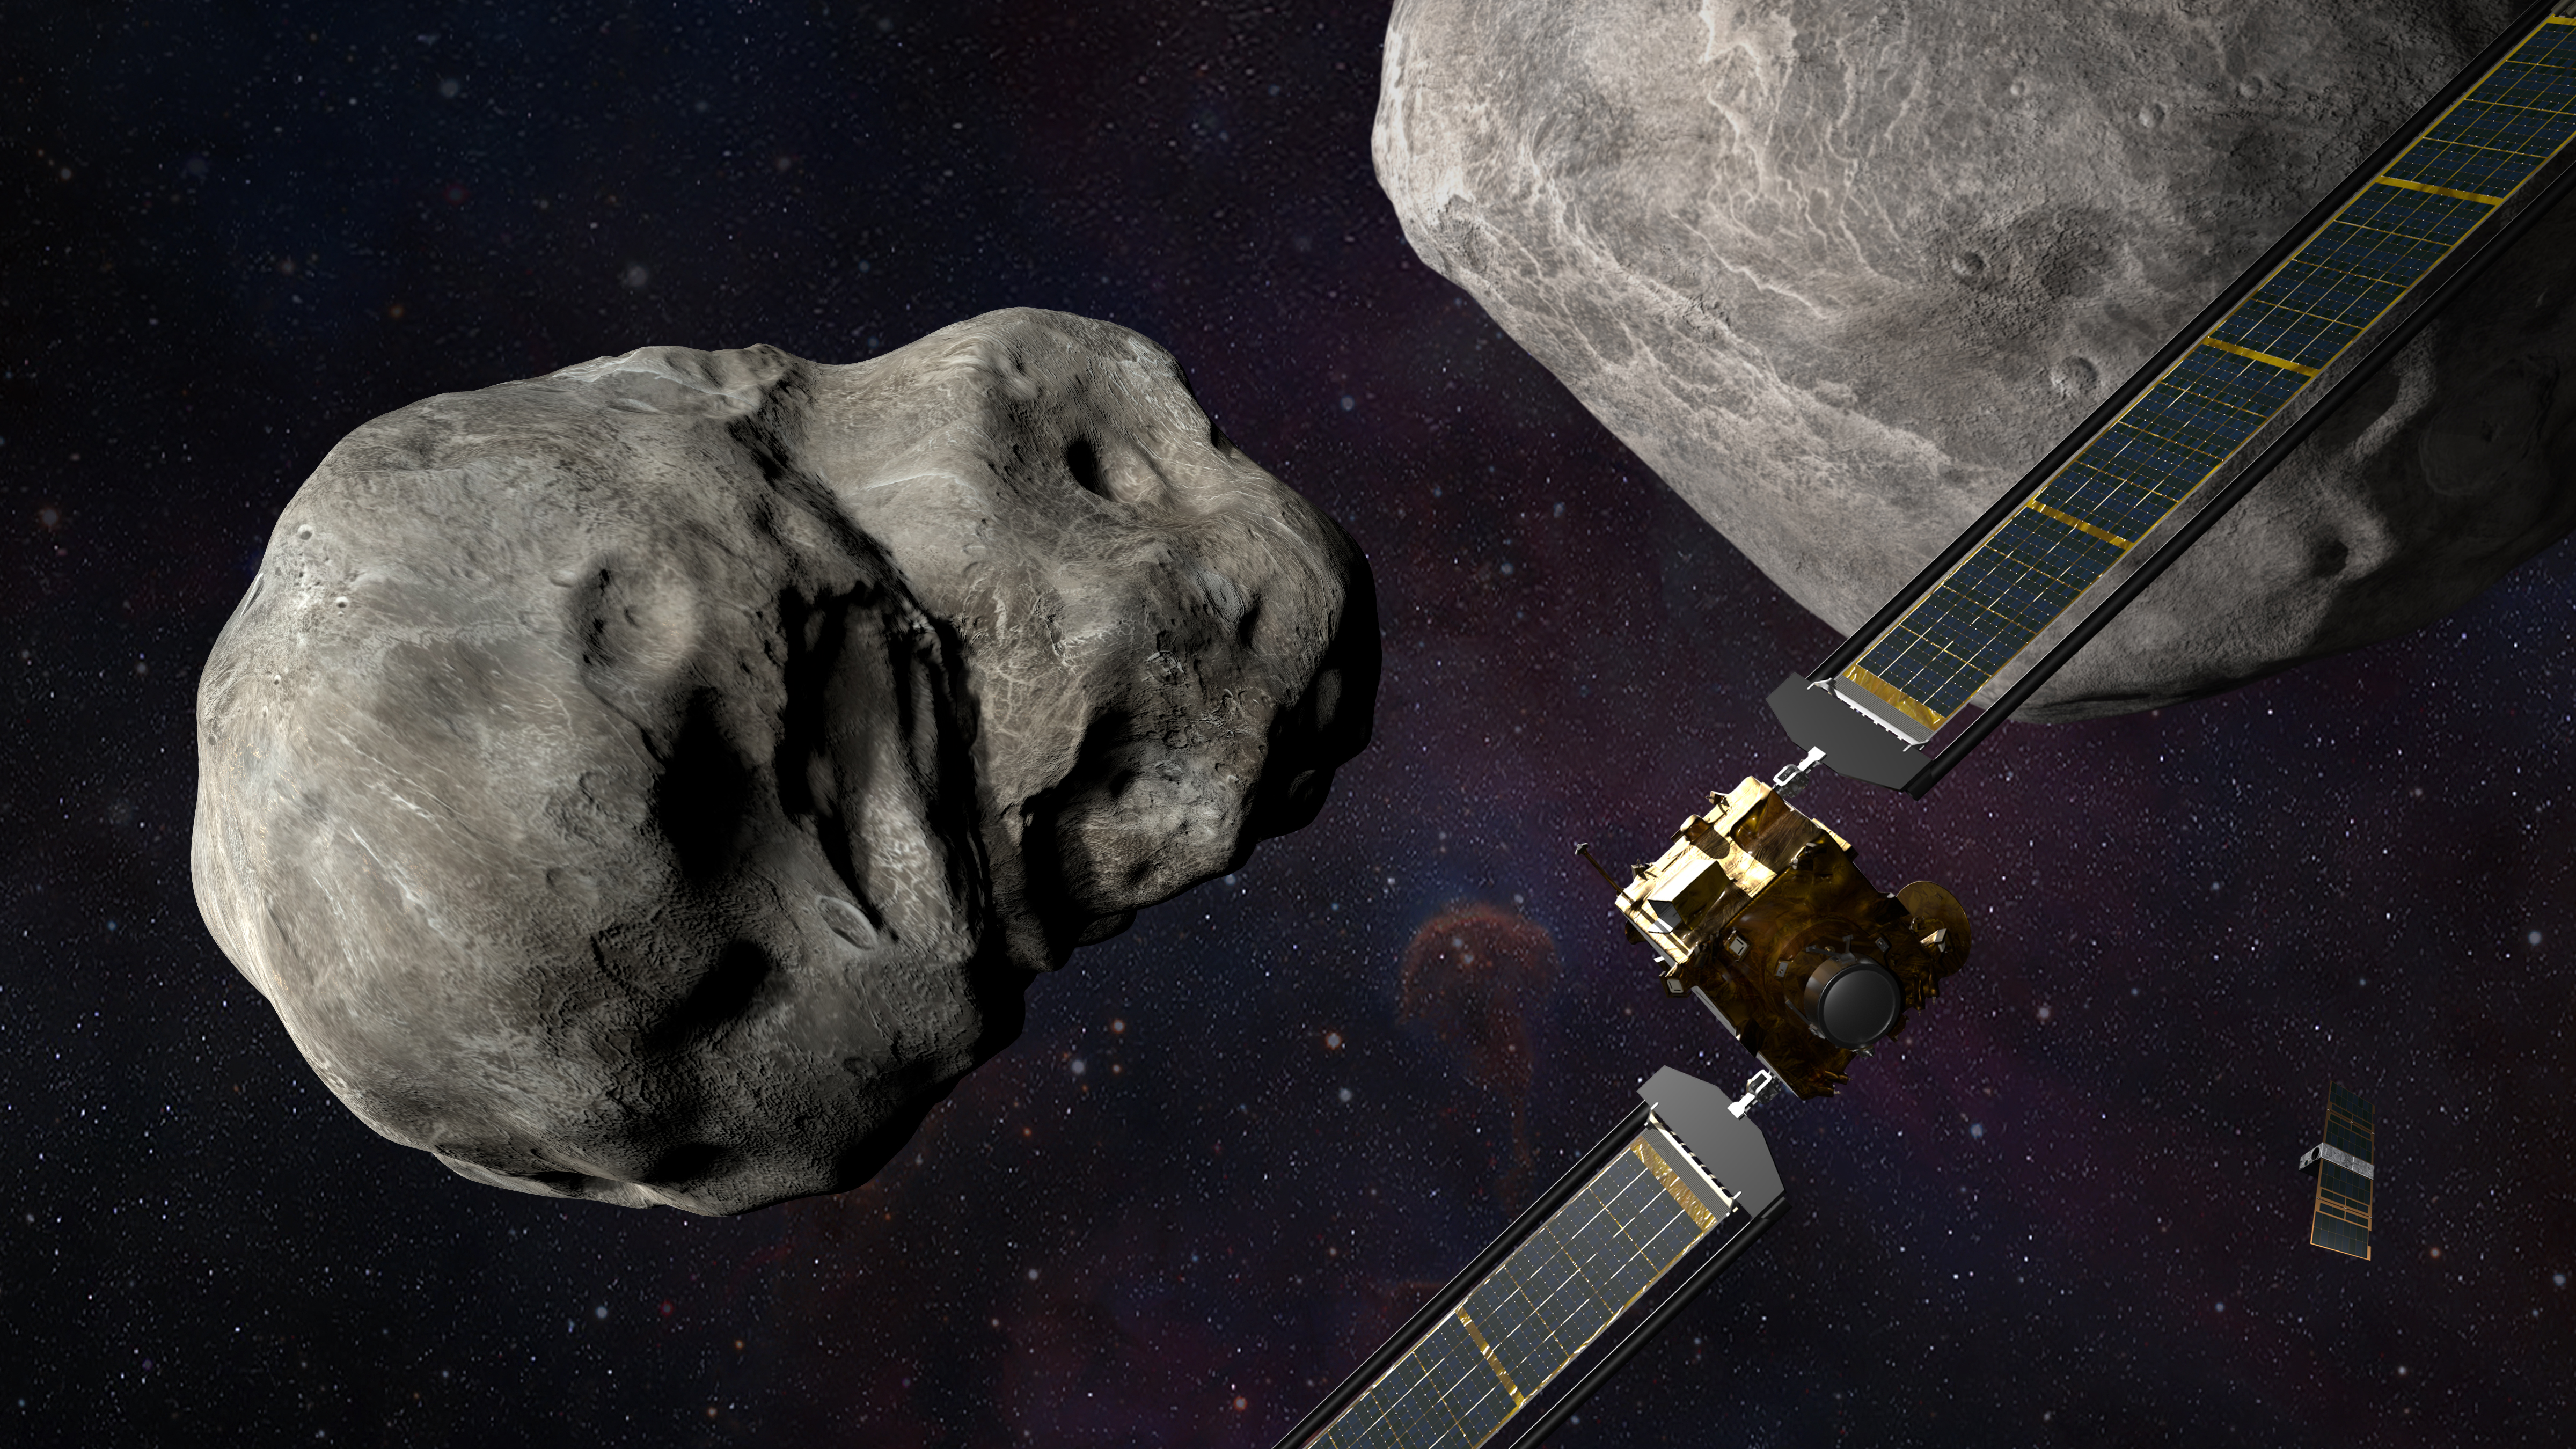 The DART spacecraft successfully collided with Dimorphos, which itself was orbiting a larger asteroid named Didymos.